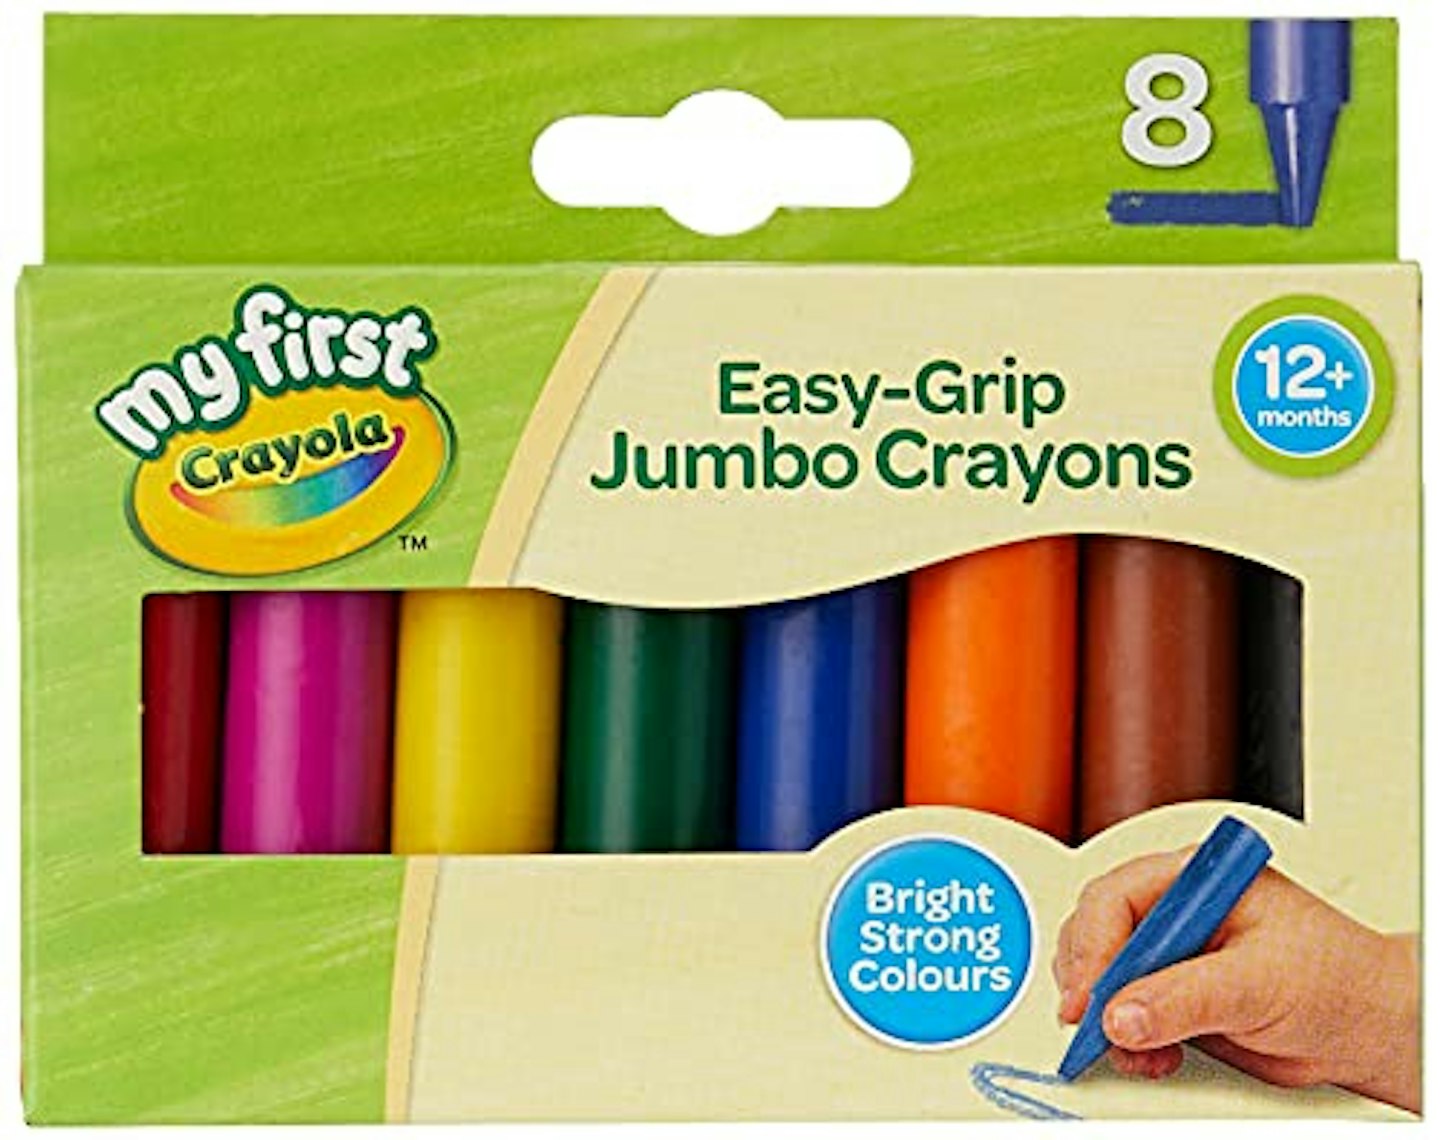 Honeysticks 100% Pure Beeswax Crayons (16 Pack) - Jumbo Crayons for  Toddlers, Kids - Non Toxic, Food Grade Colors, Large Size is Easy to Hold  and Use